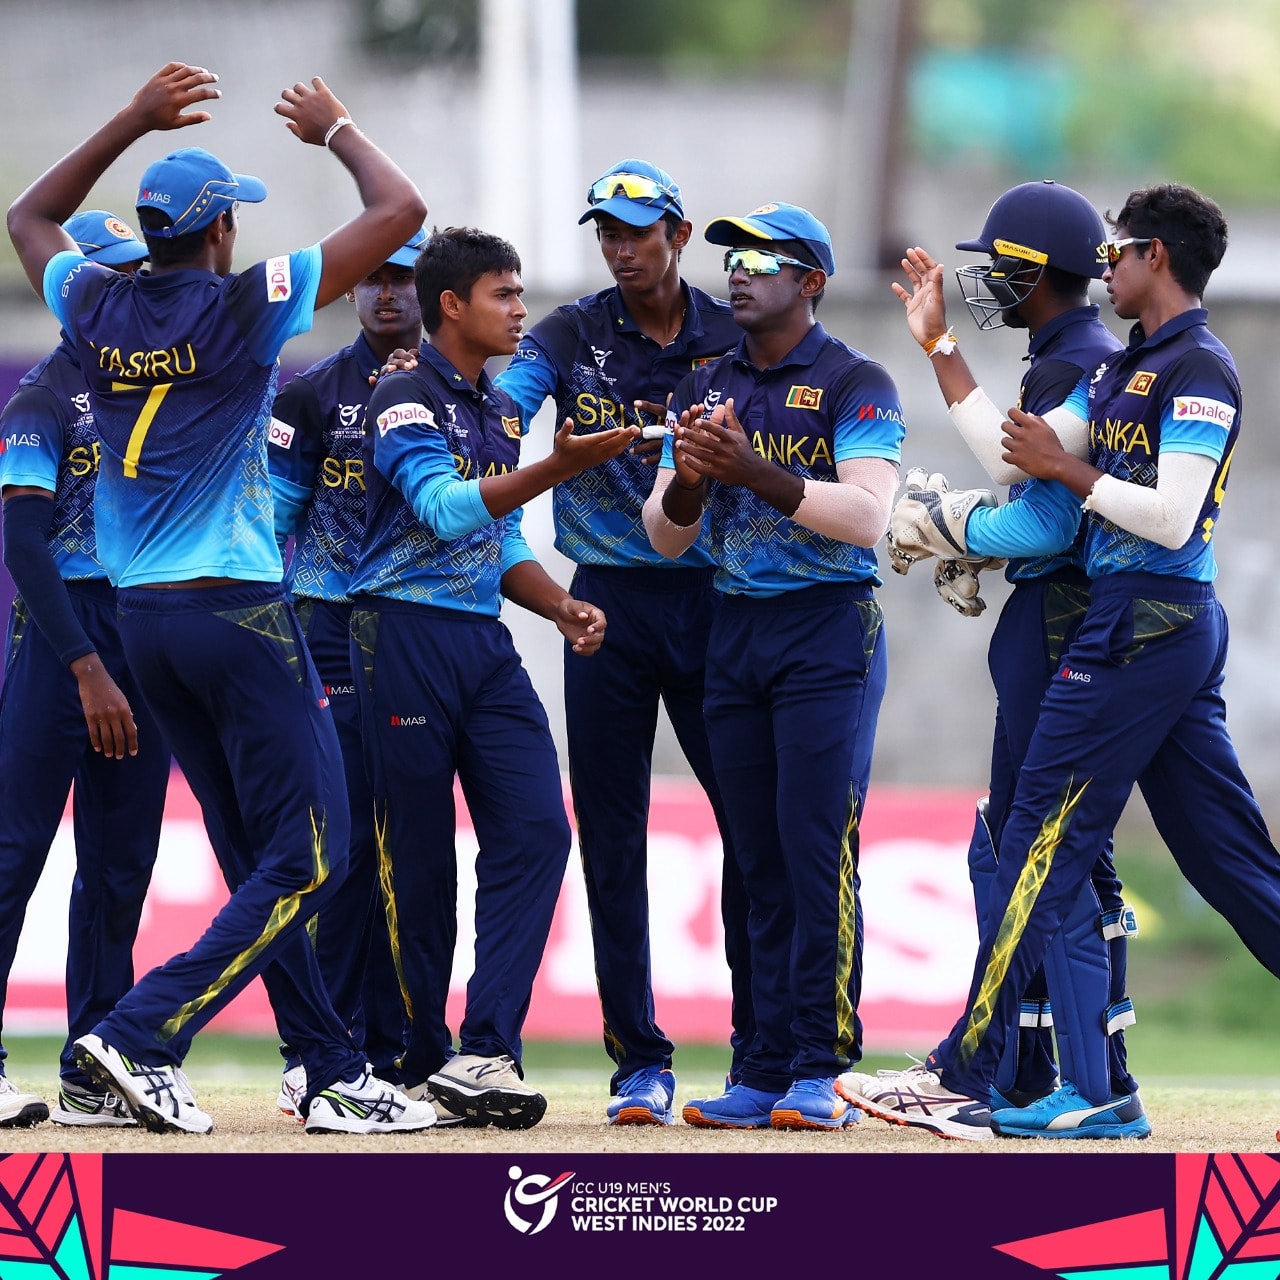 Sri Lanka lose to Pakistan in U19 World Cup fifth place face-off